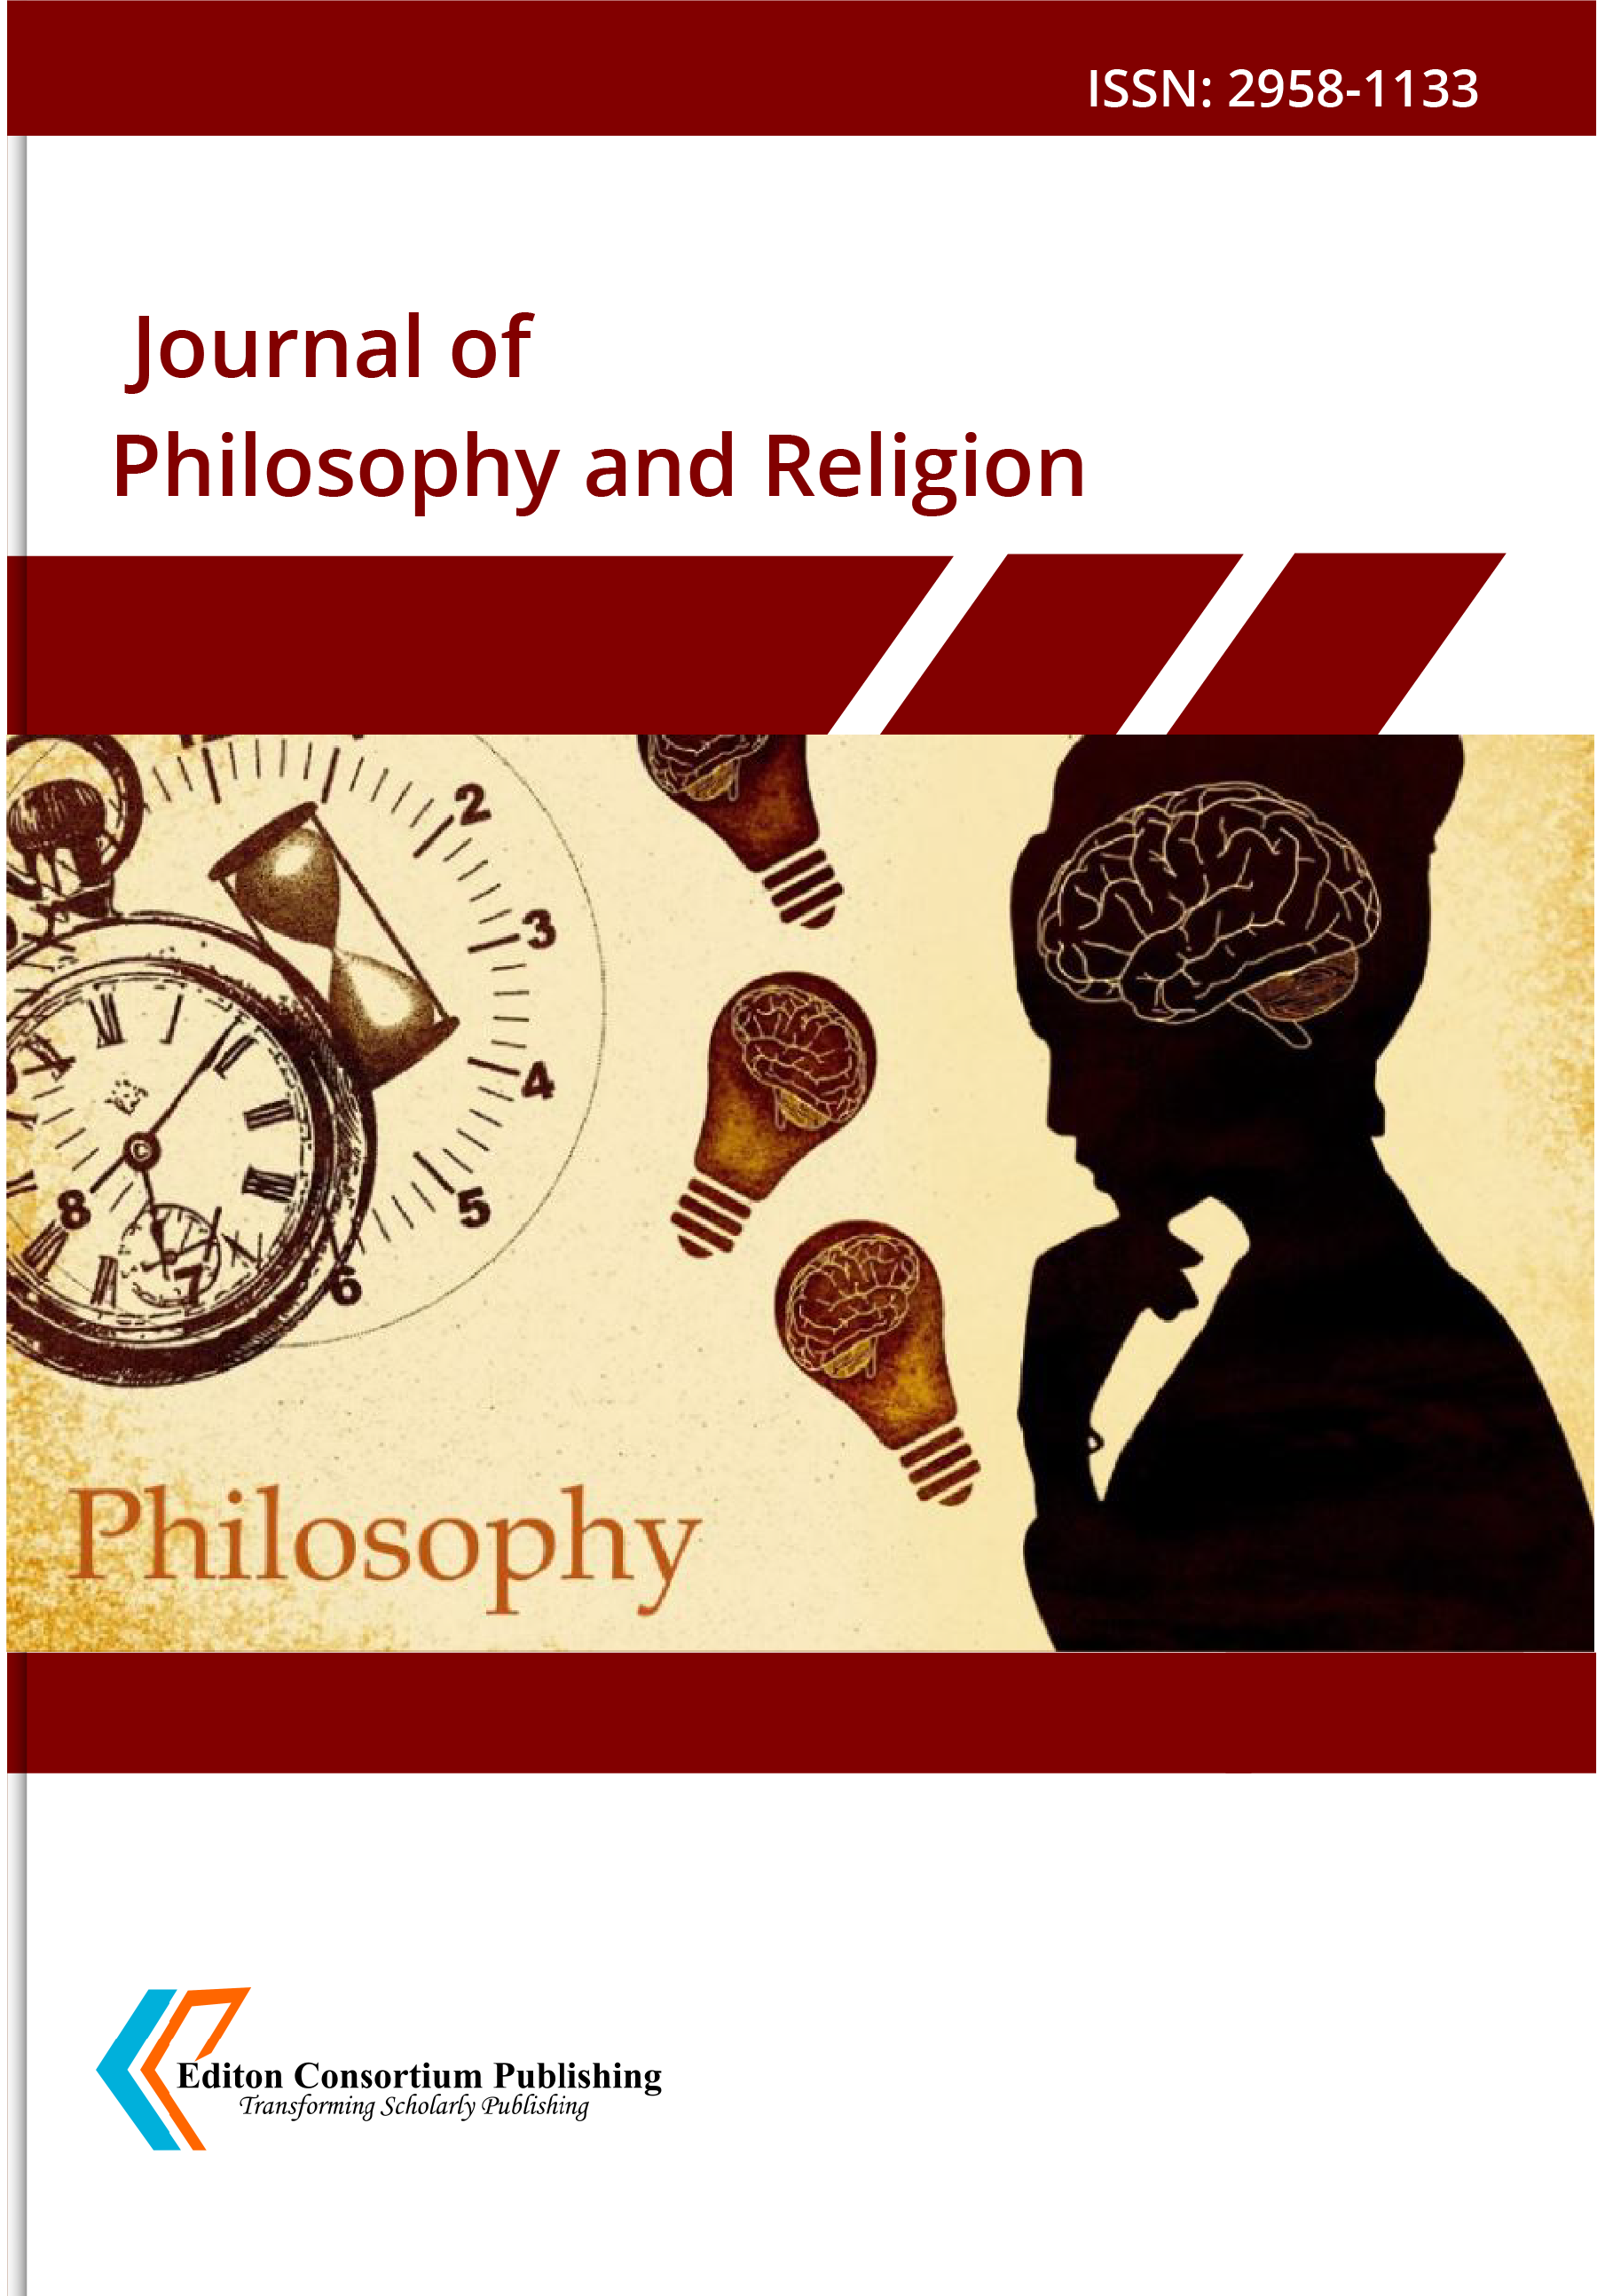  Journal of Philosophy and Religion